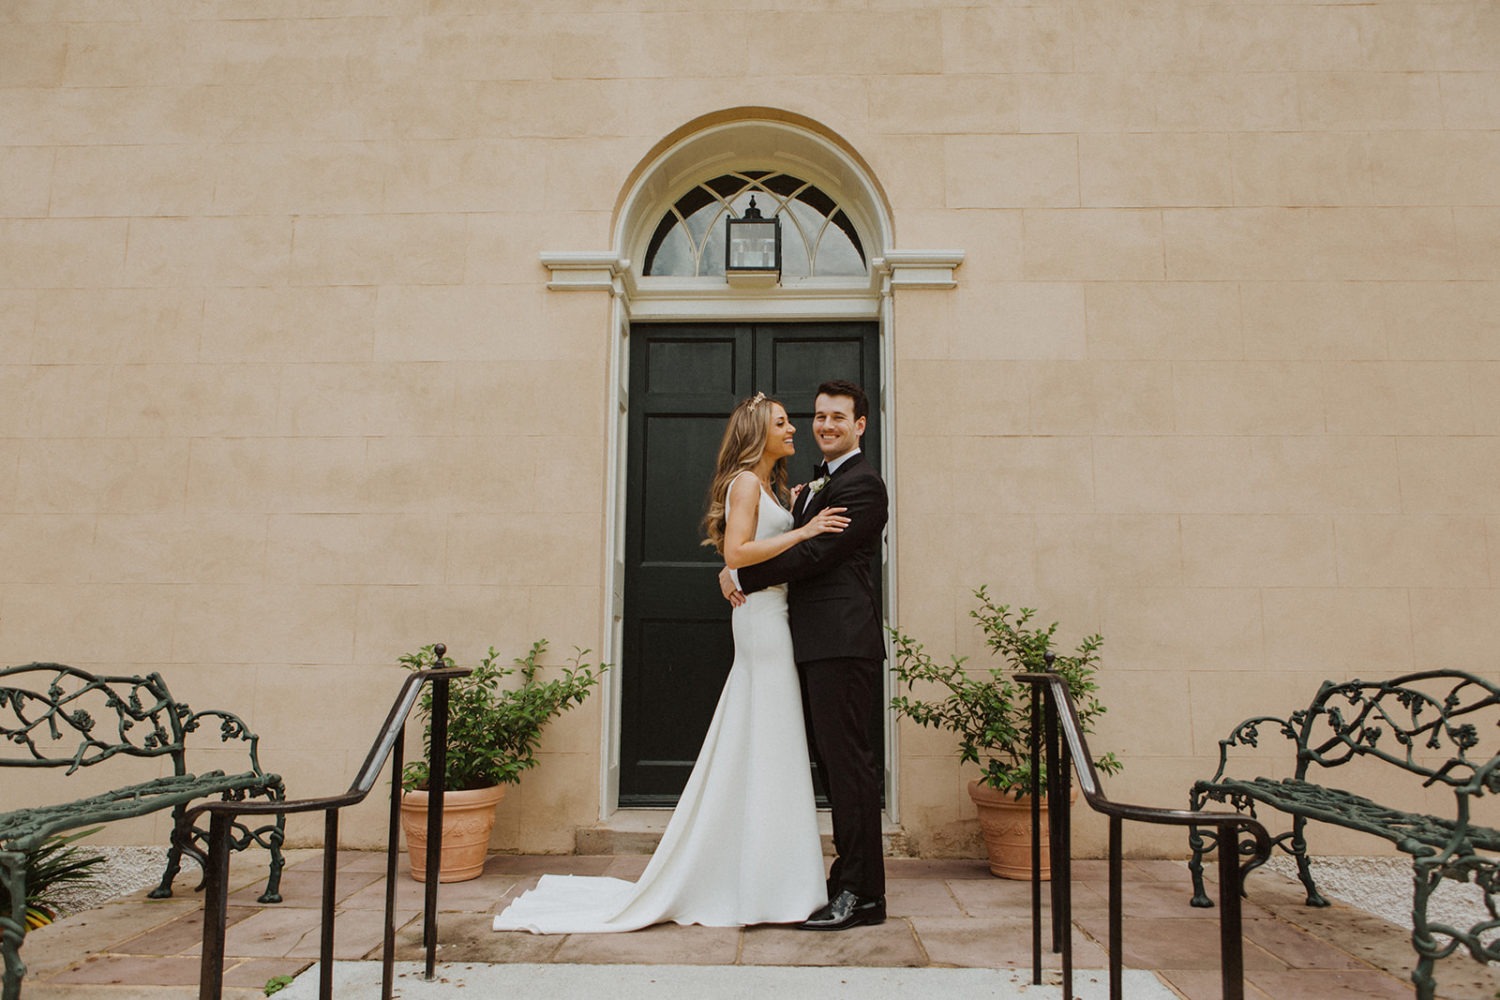 Couple embraces in front of wedding venue 